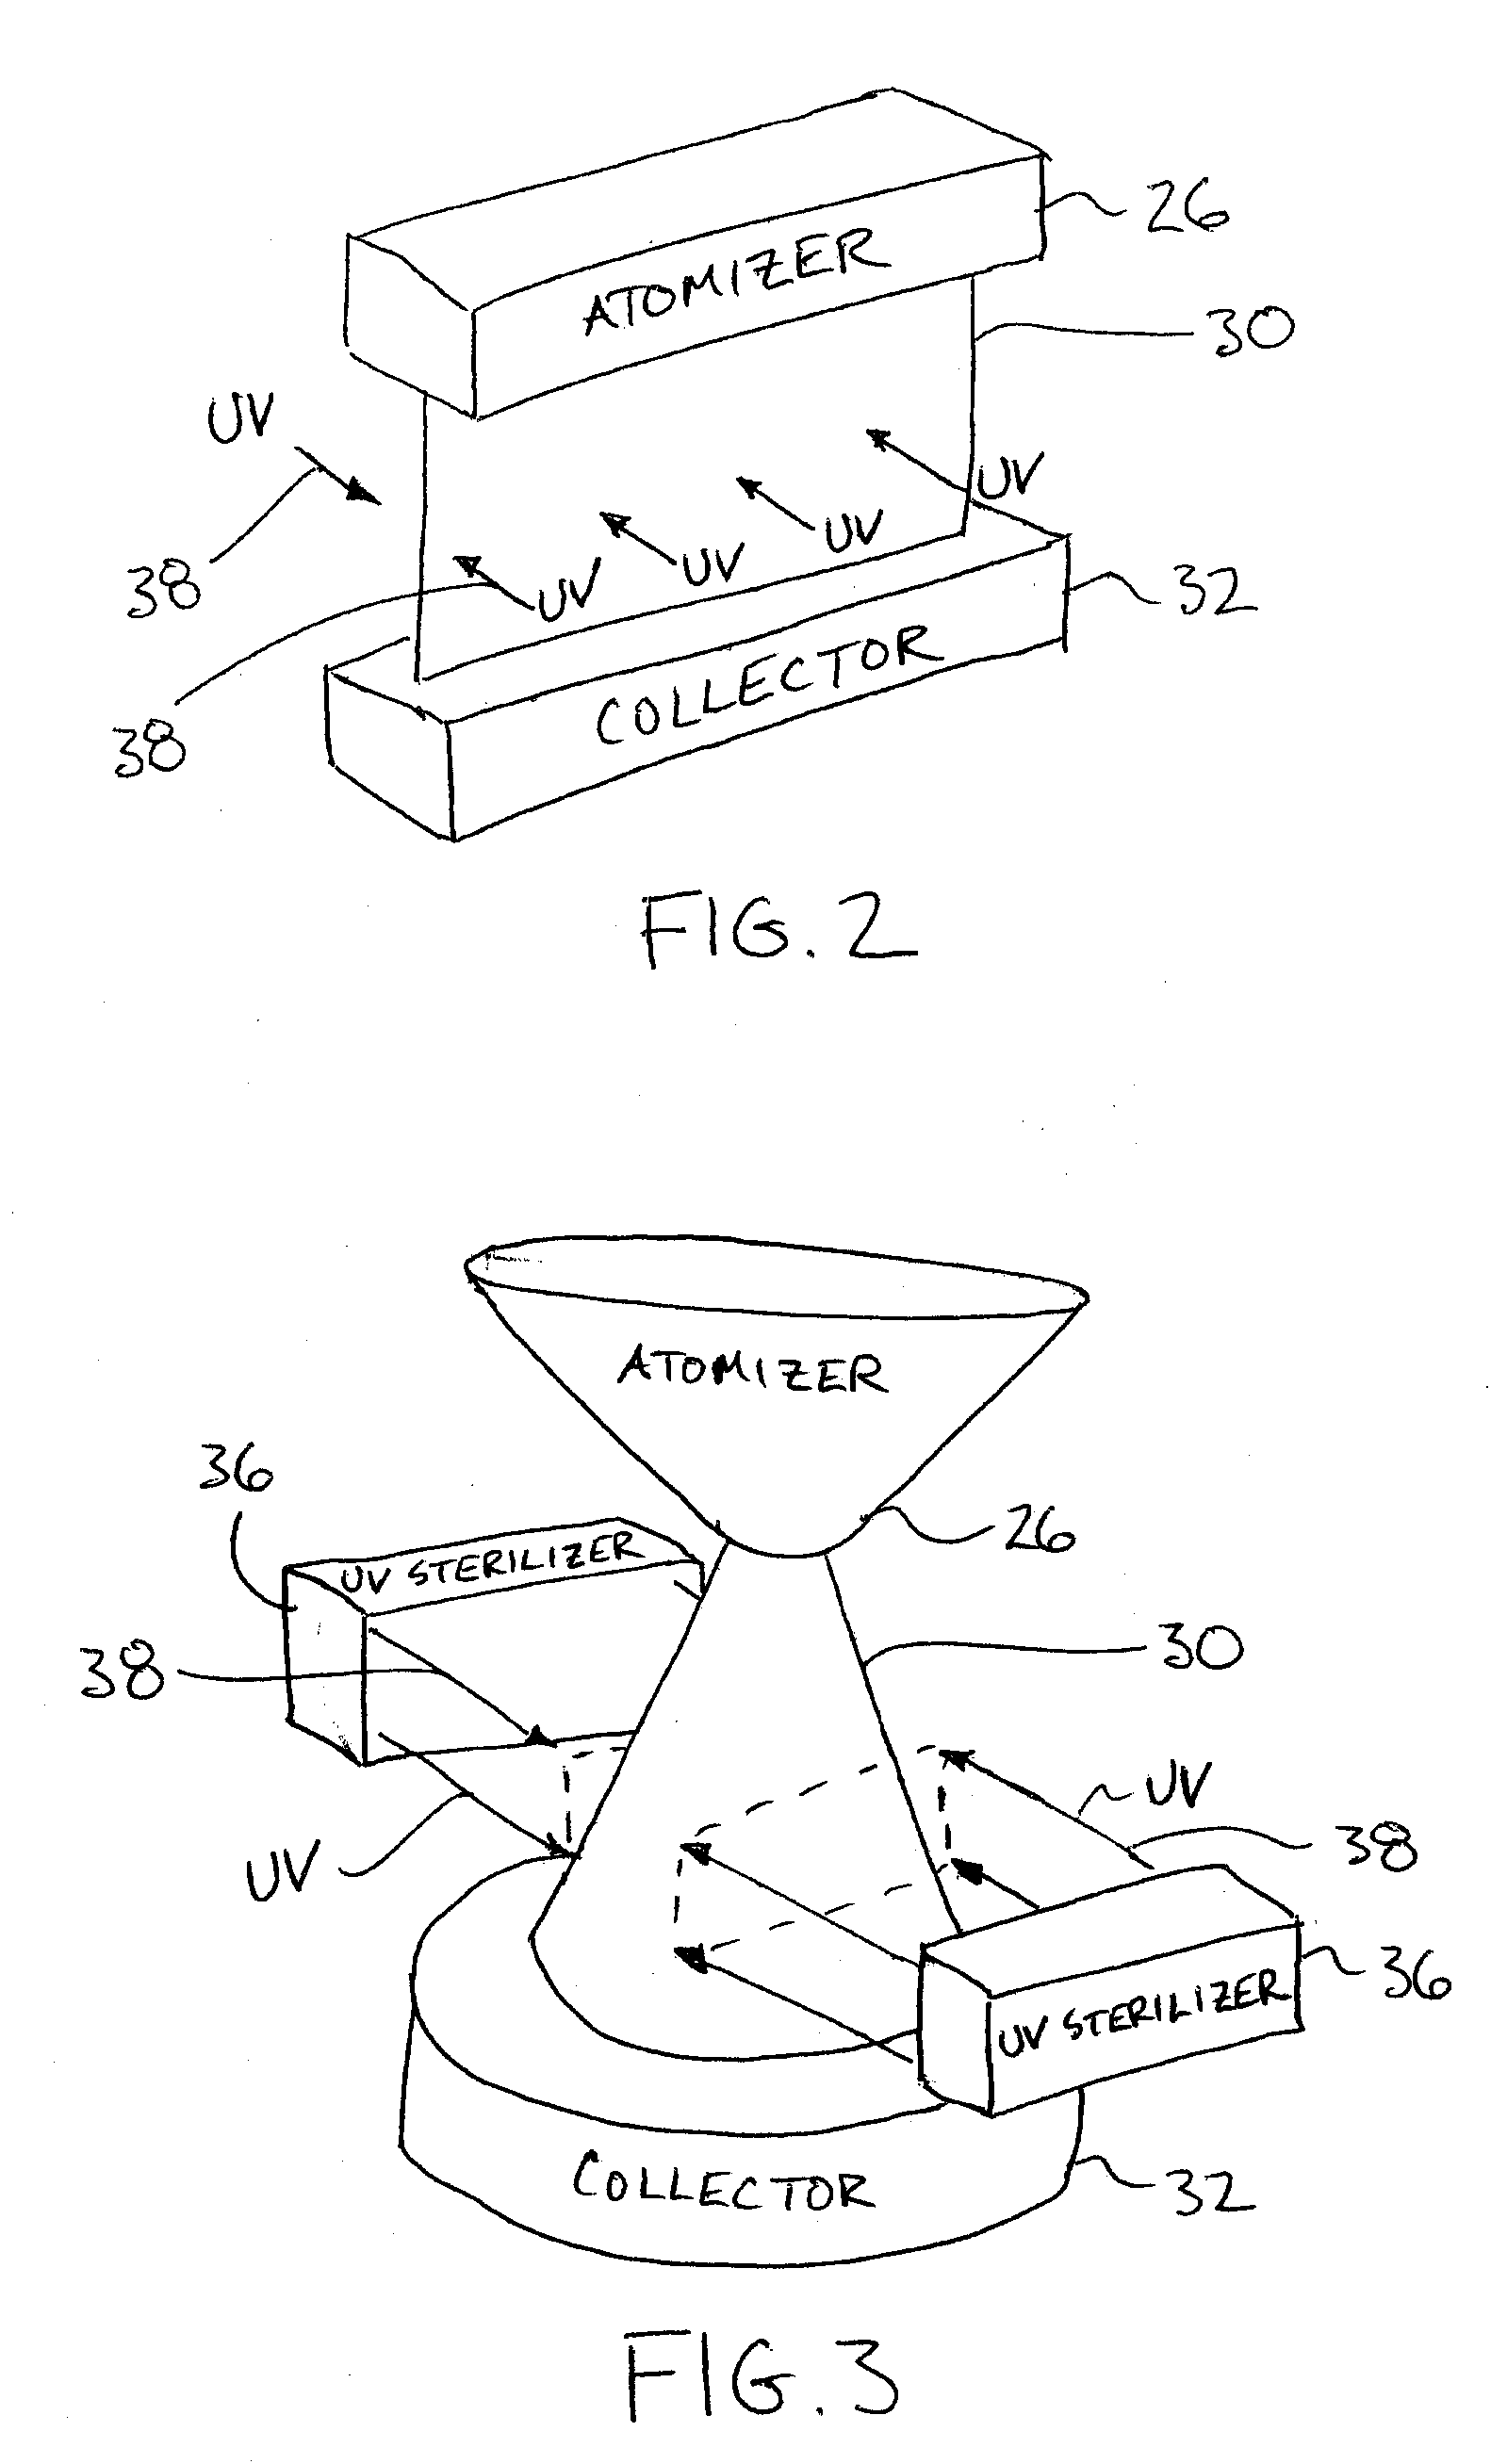 System and Method for Producing a Packaged Batter